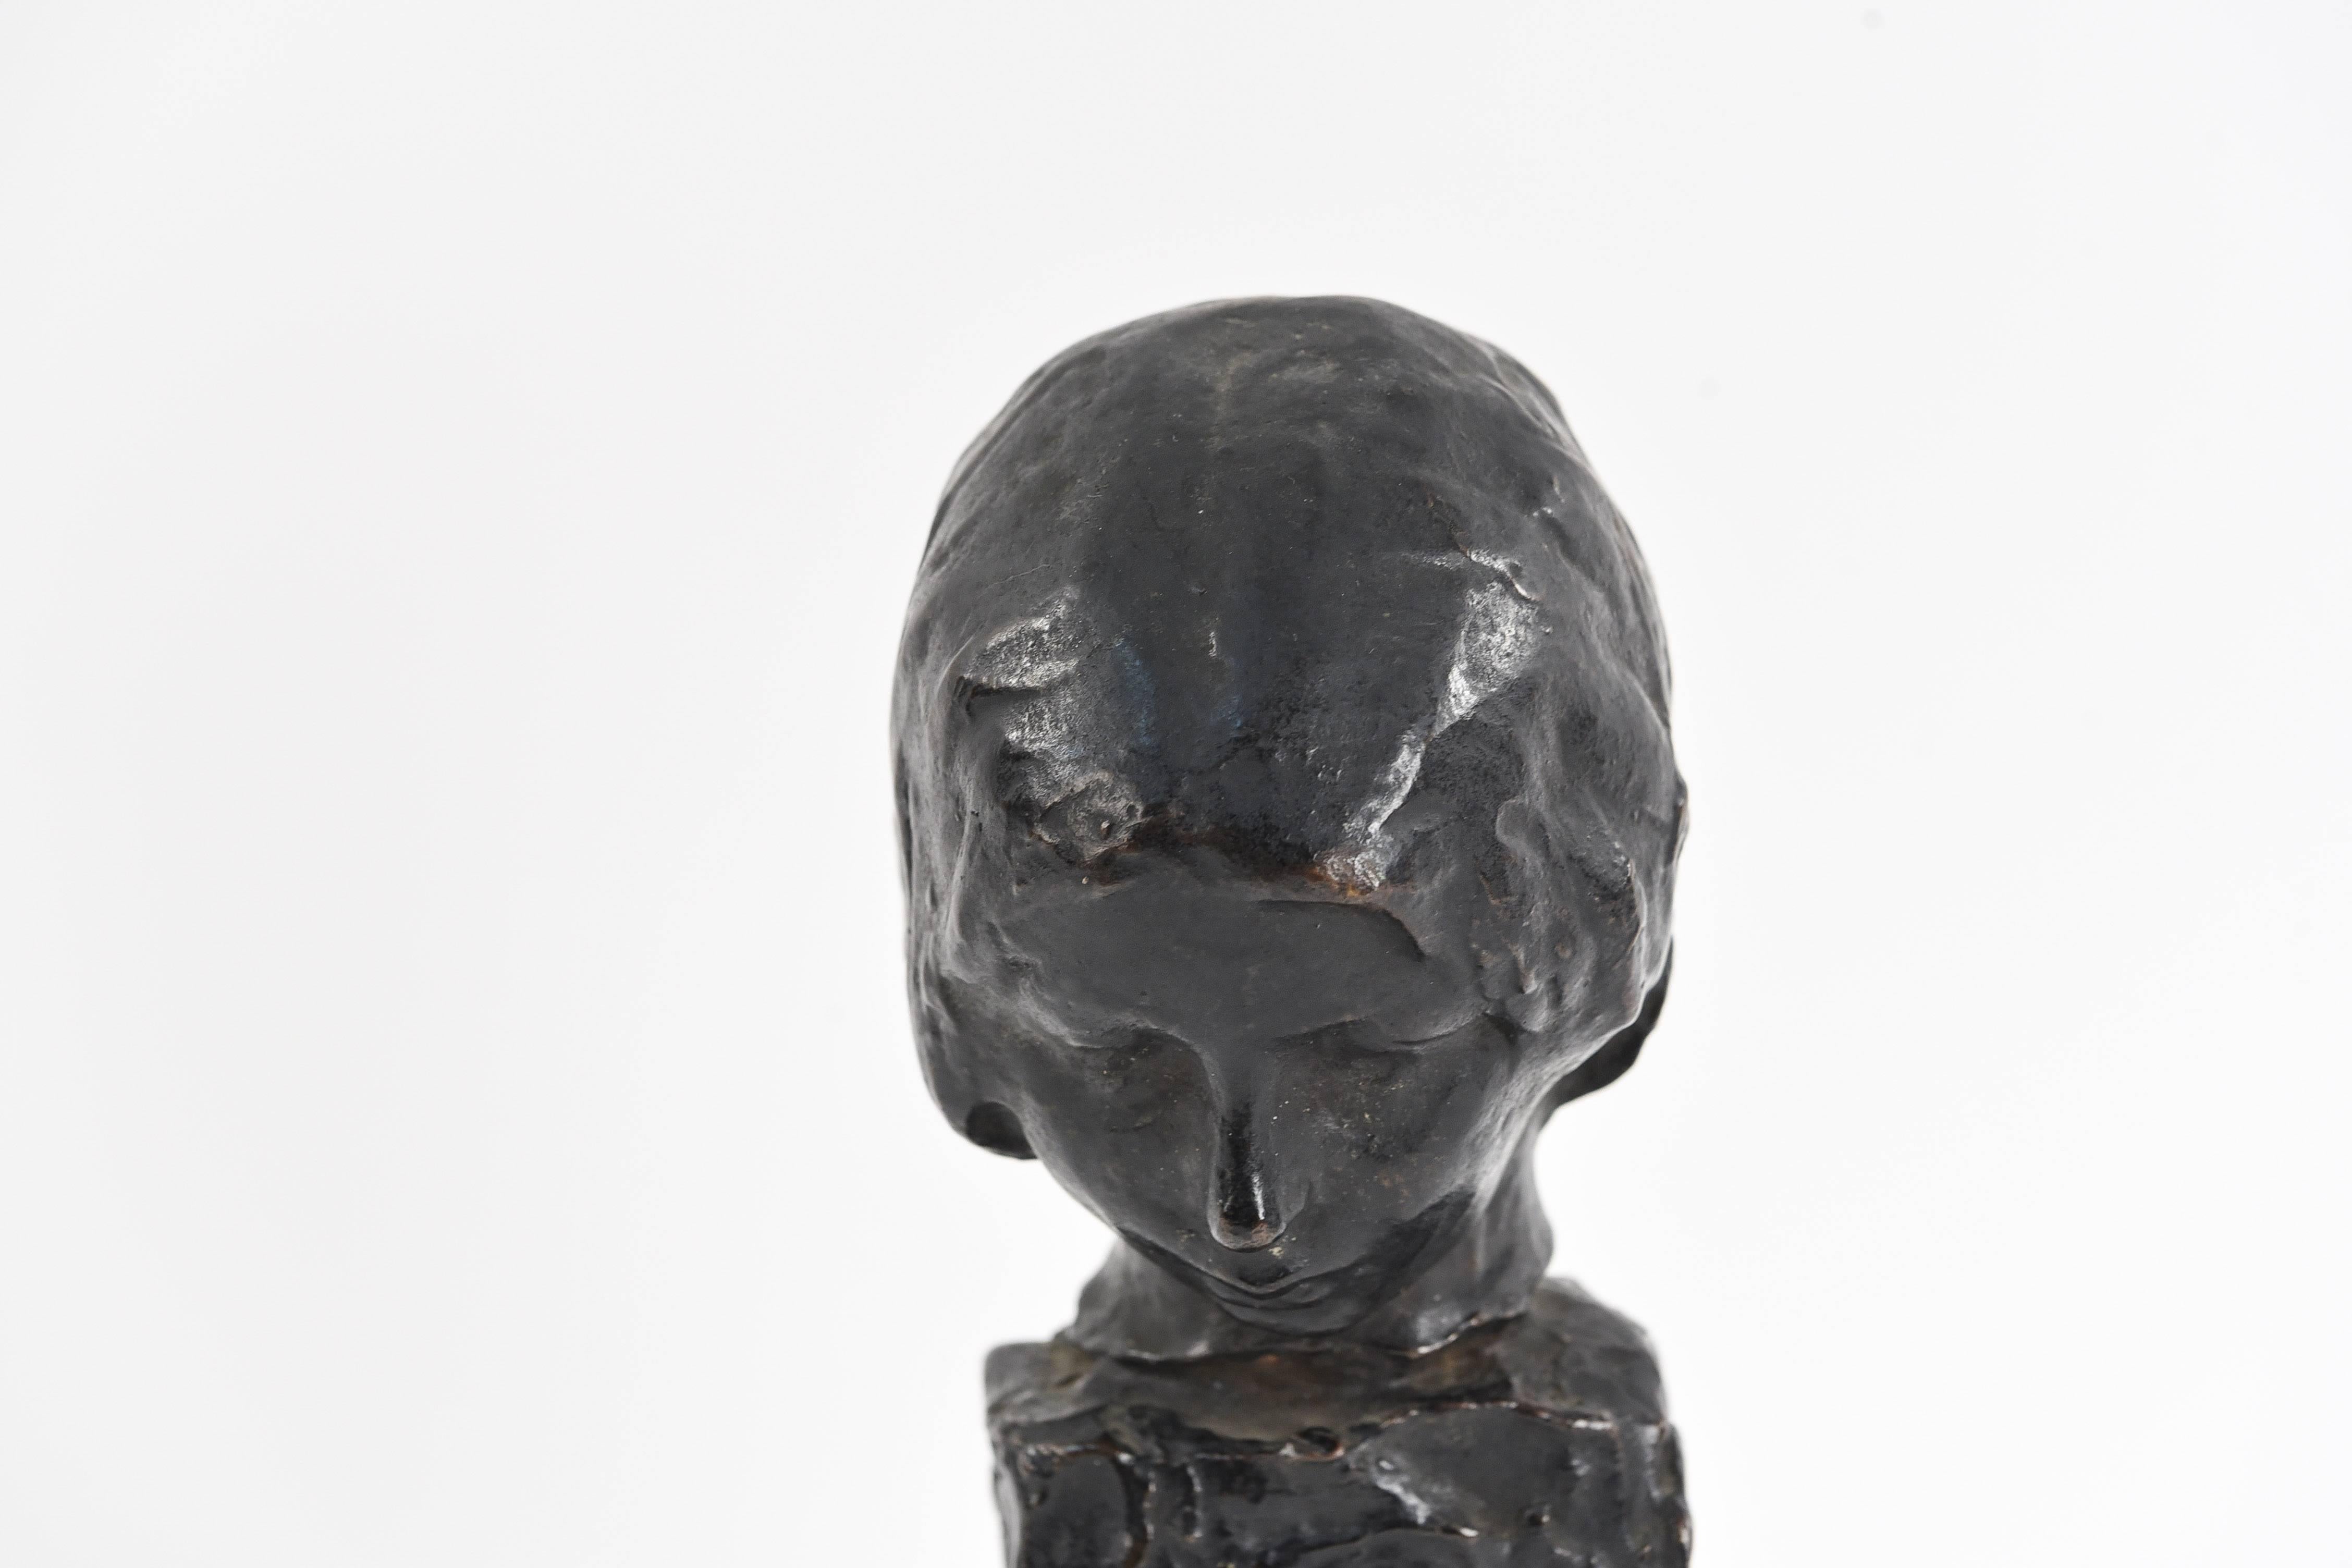 Marked underneath No. 1, and signed George Conlon, German Bronze Works to base. This patinated bronze bust sculpture of a woman features an interesting abstract pedestal base in the brutalist manner, with the woman's head in a slight downturned